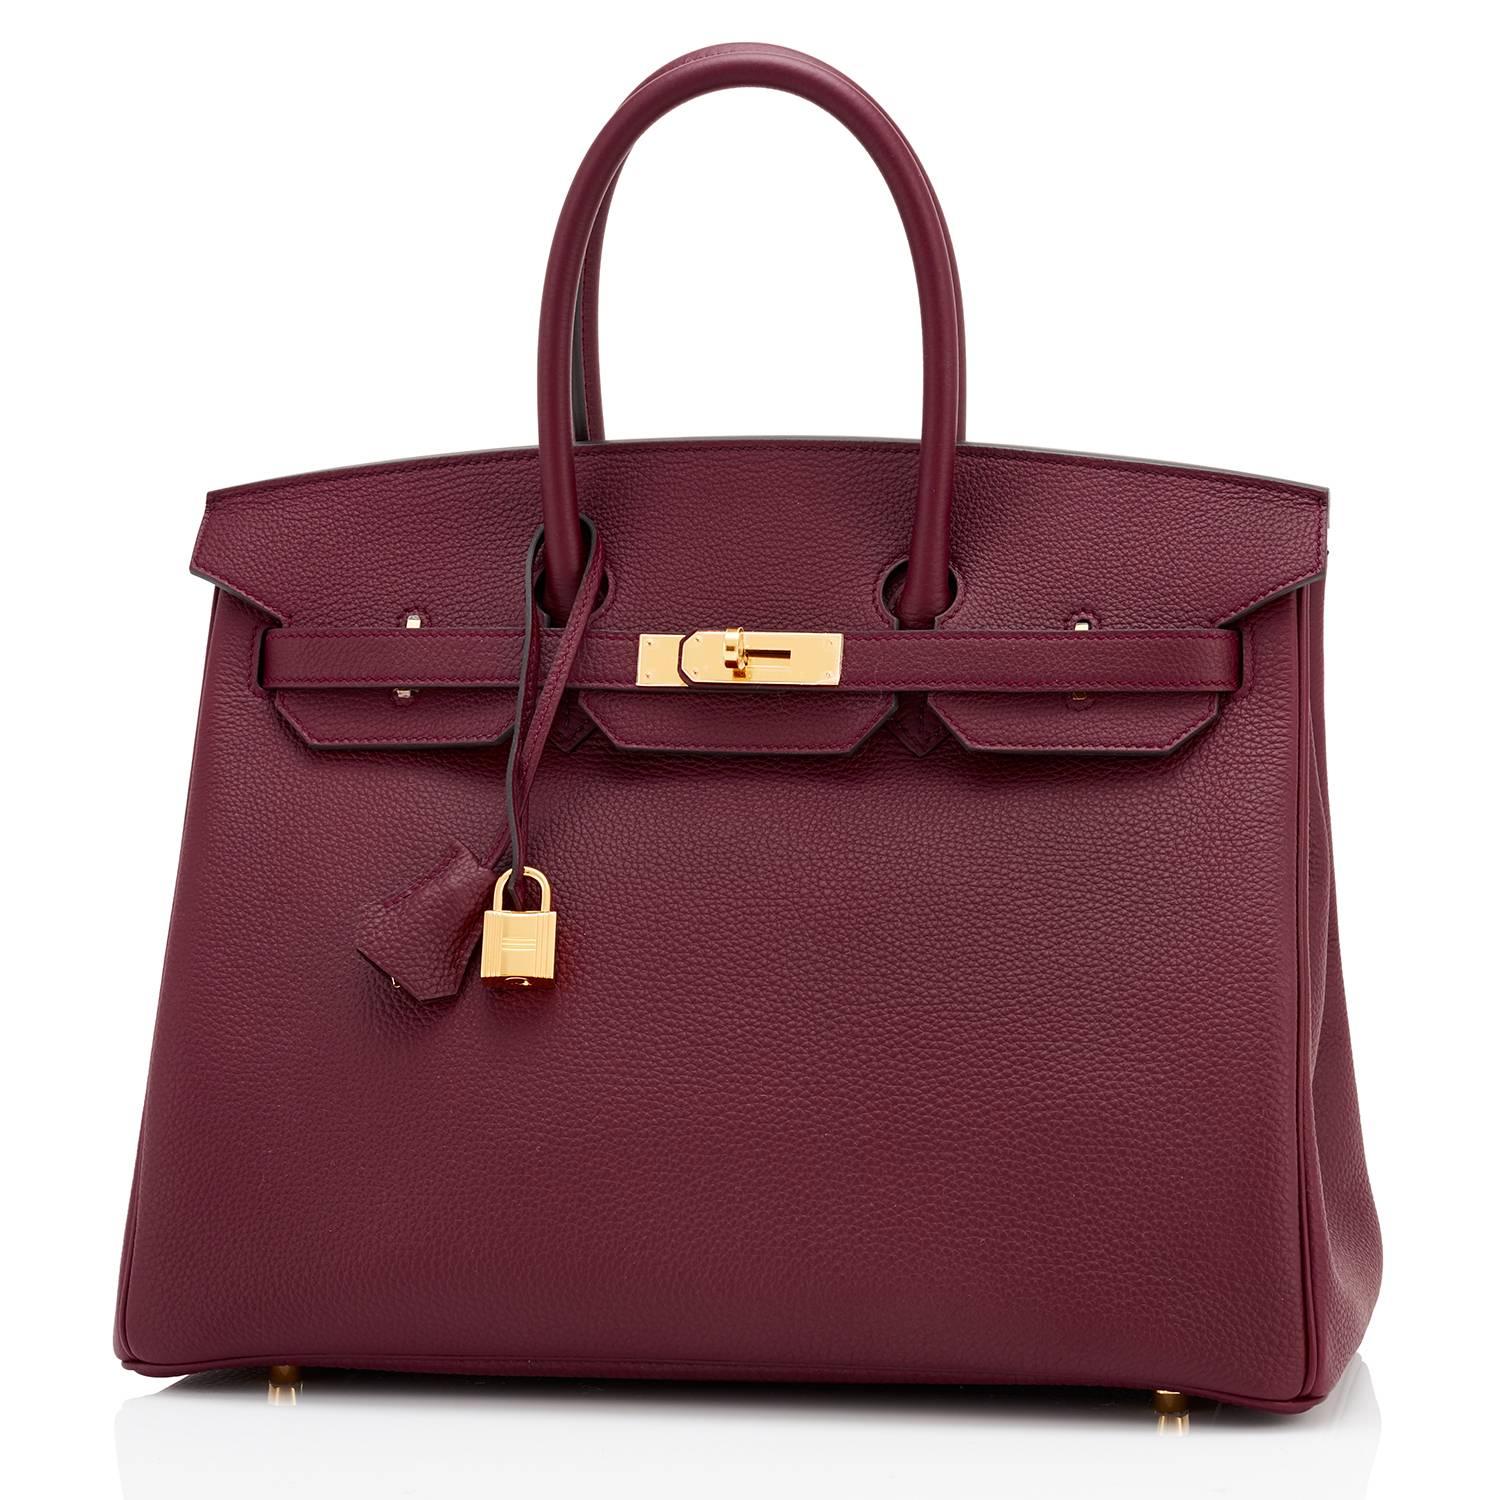 Hermes Bordeaux 35cm Birkin Togo Gold Hardware A Stamp 
Brand New in Box. Store fresh. Pristine condition (with plastic on hardware). 
Just purchased from Hermes store; bag bears new 2017 interior A stamp.
Perfect gift! Comes with keys, lock,